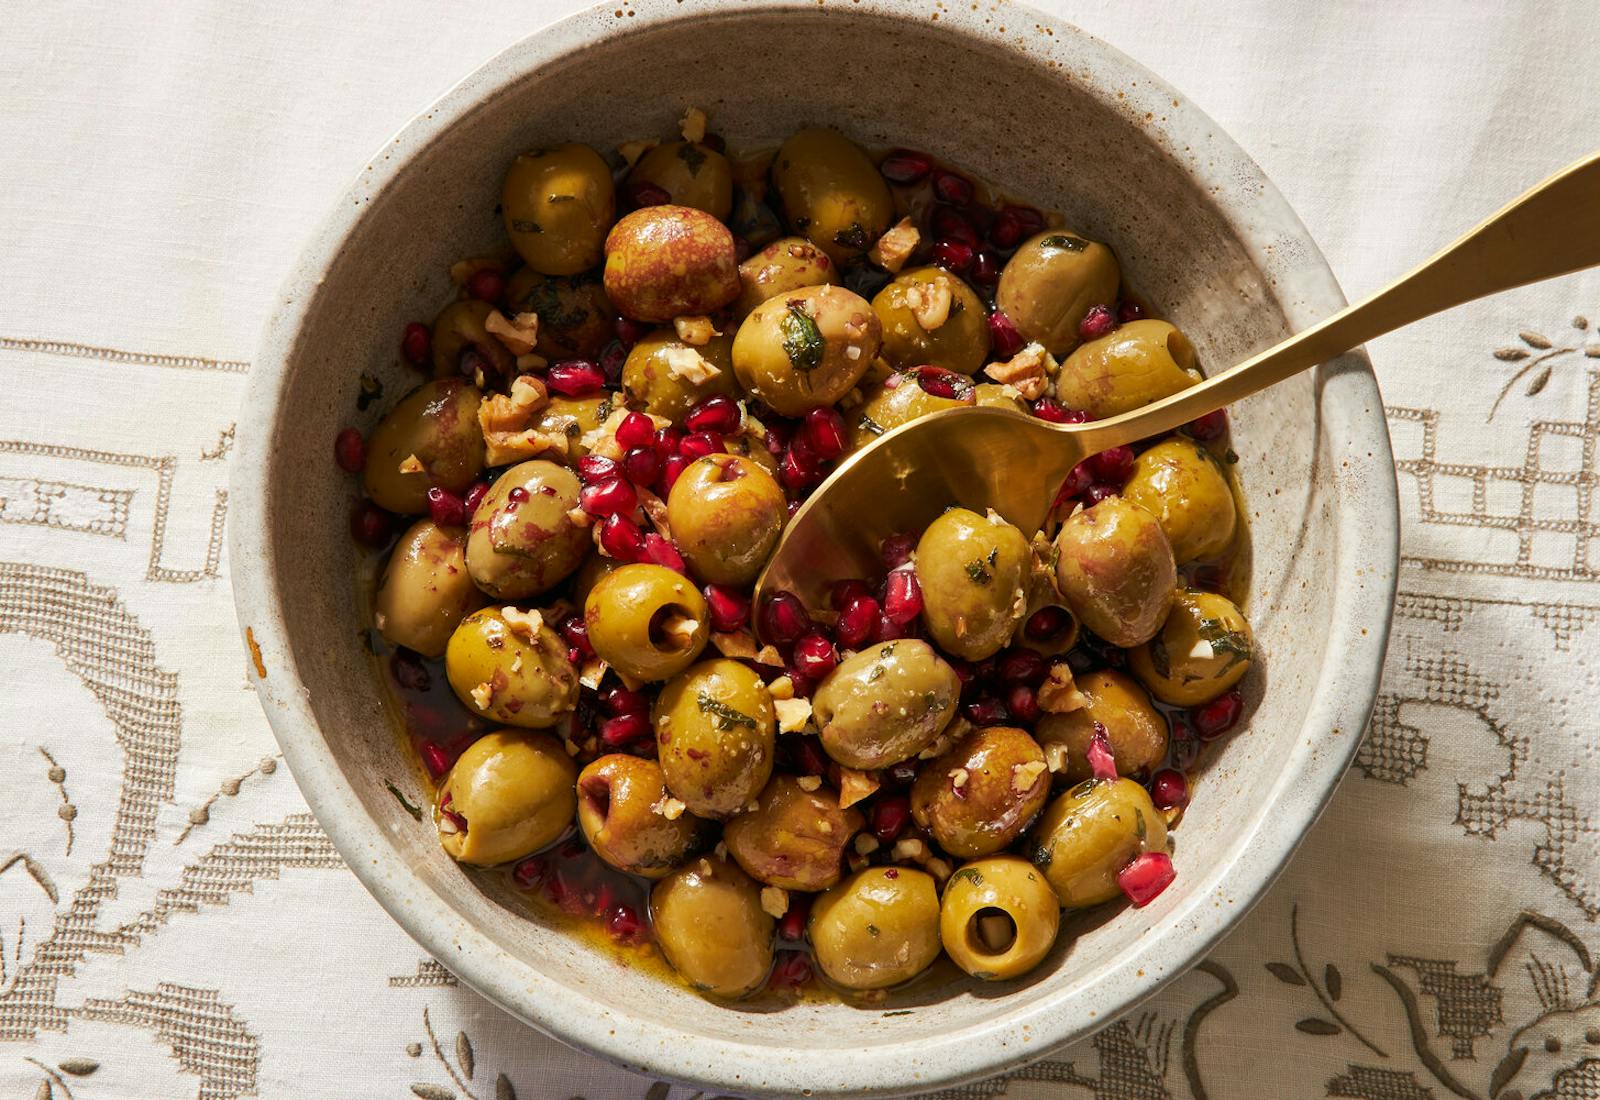 Olive salad with pomegranate in white bowl with gold serving spoon, atop white patterned tablecloth.